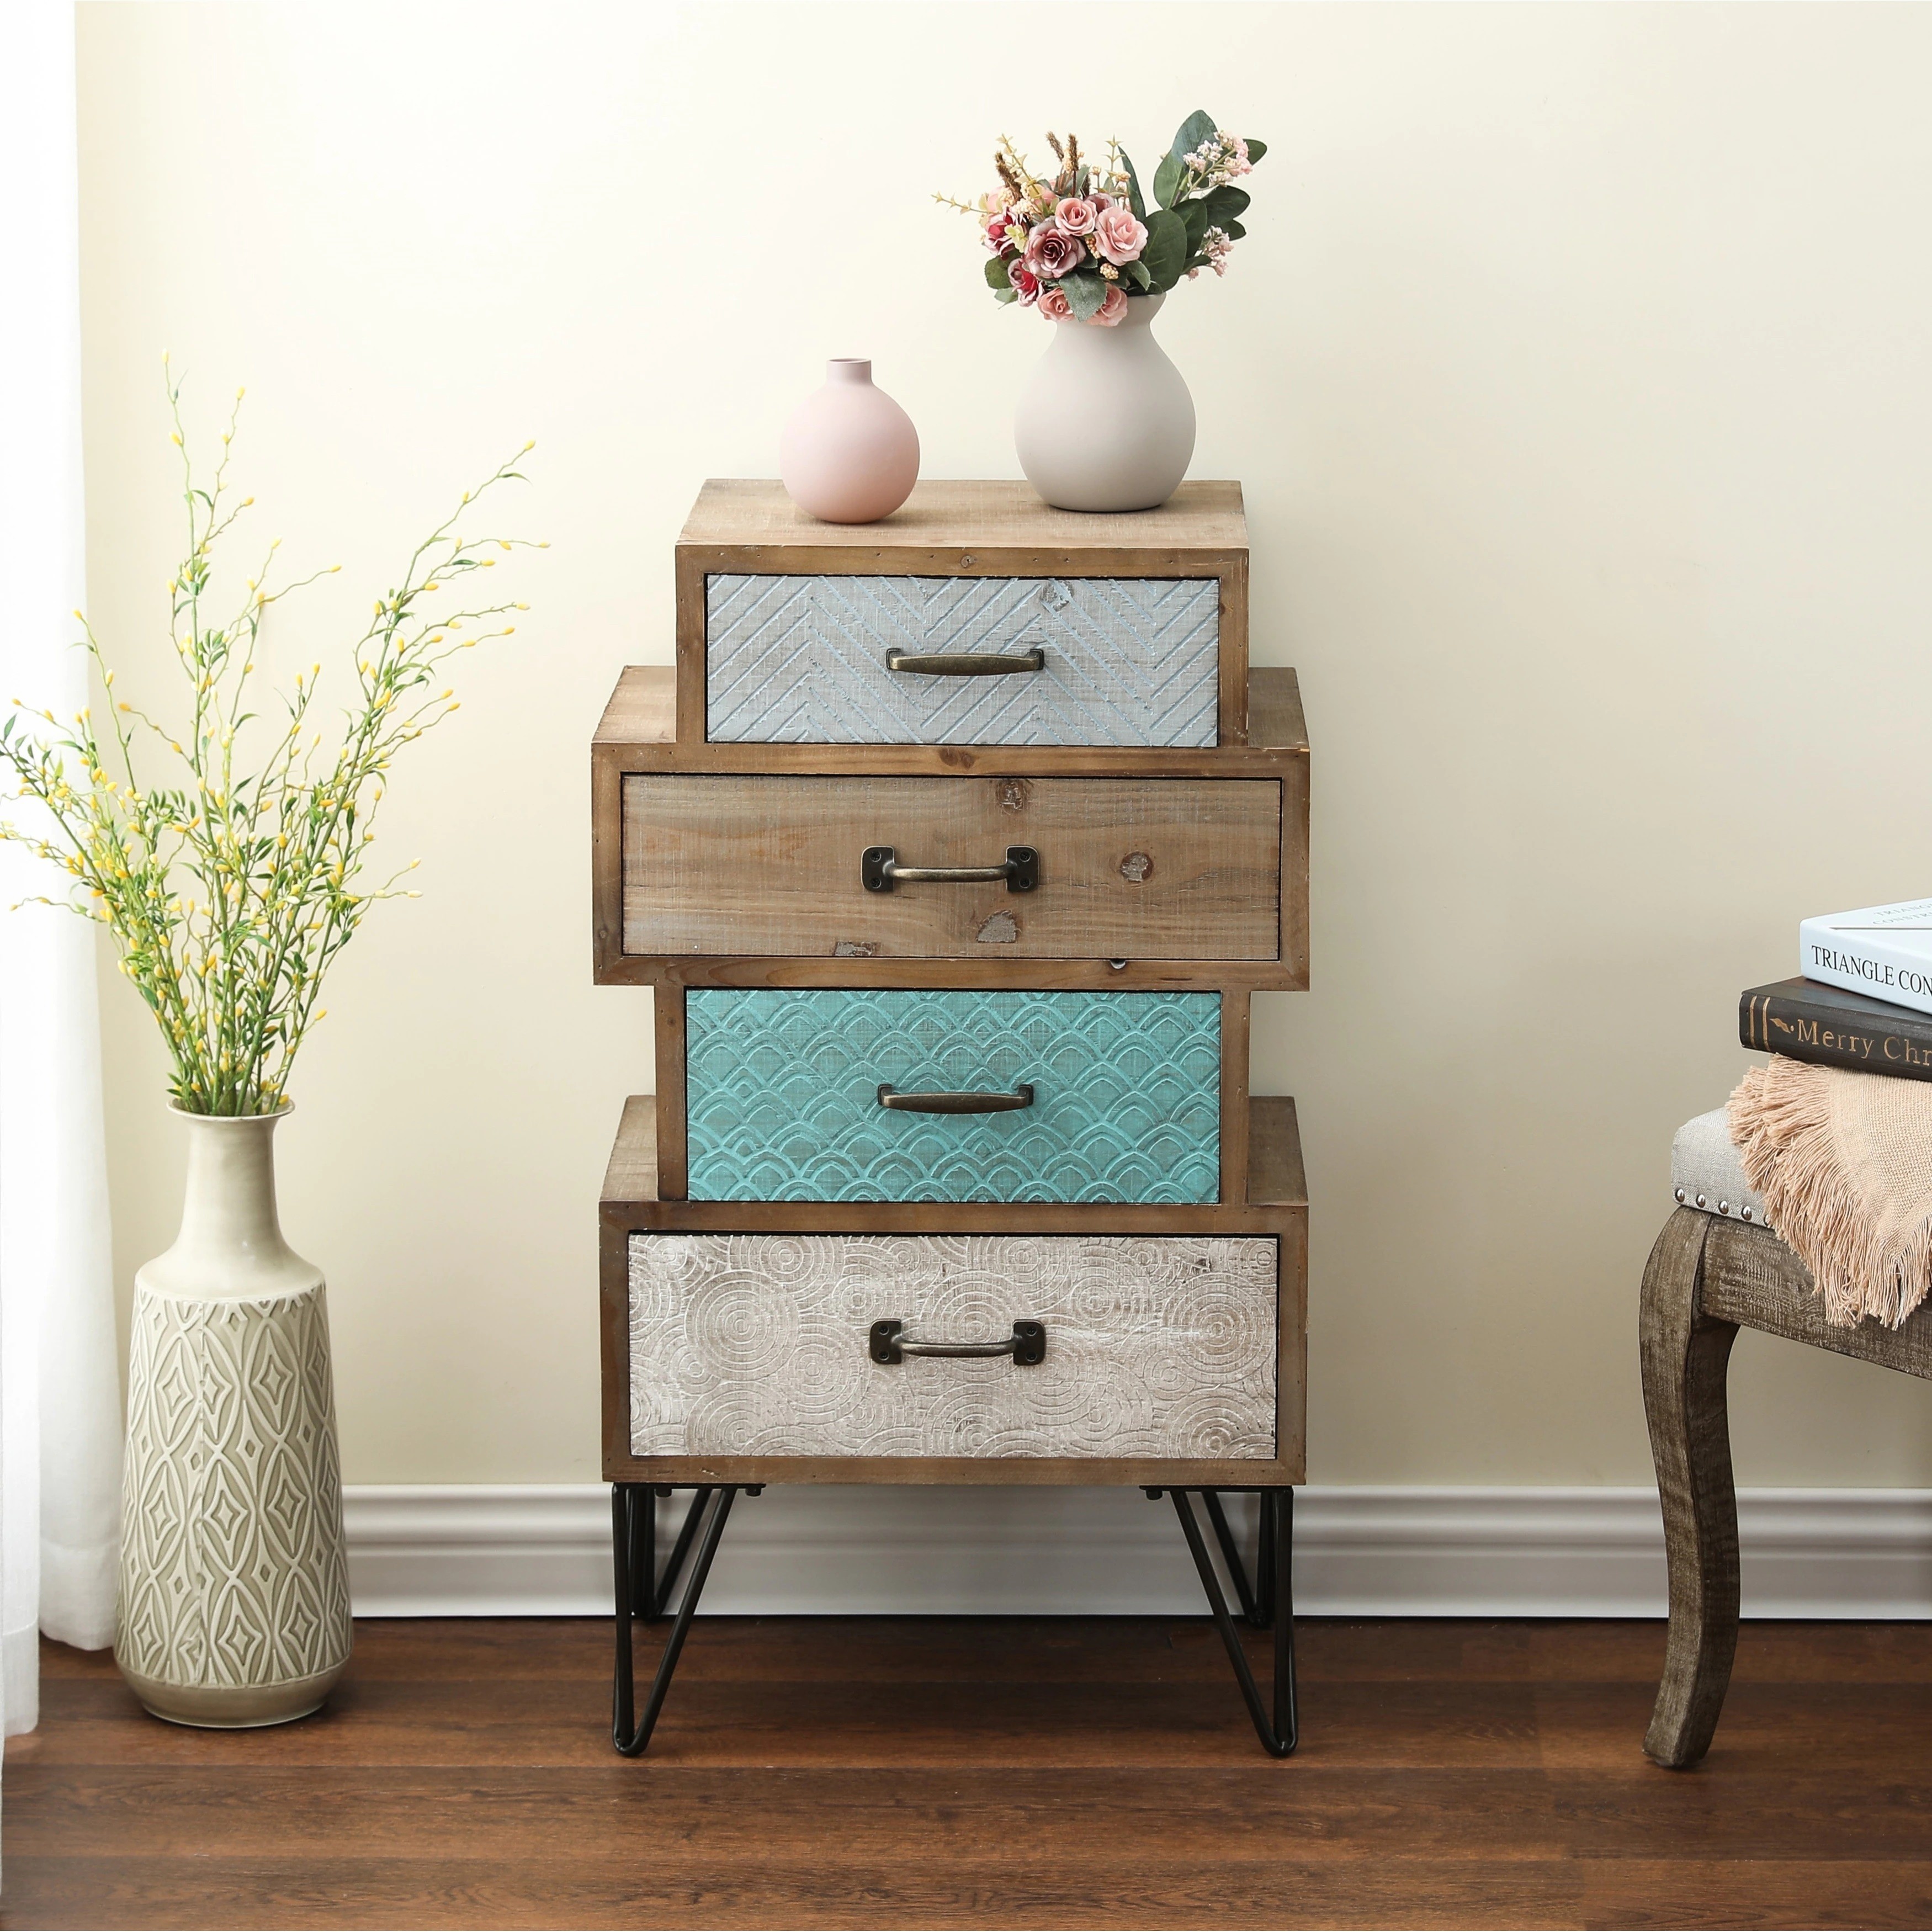 A statement found pieces iron and wood bedroom furniture   a storage cabinet